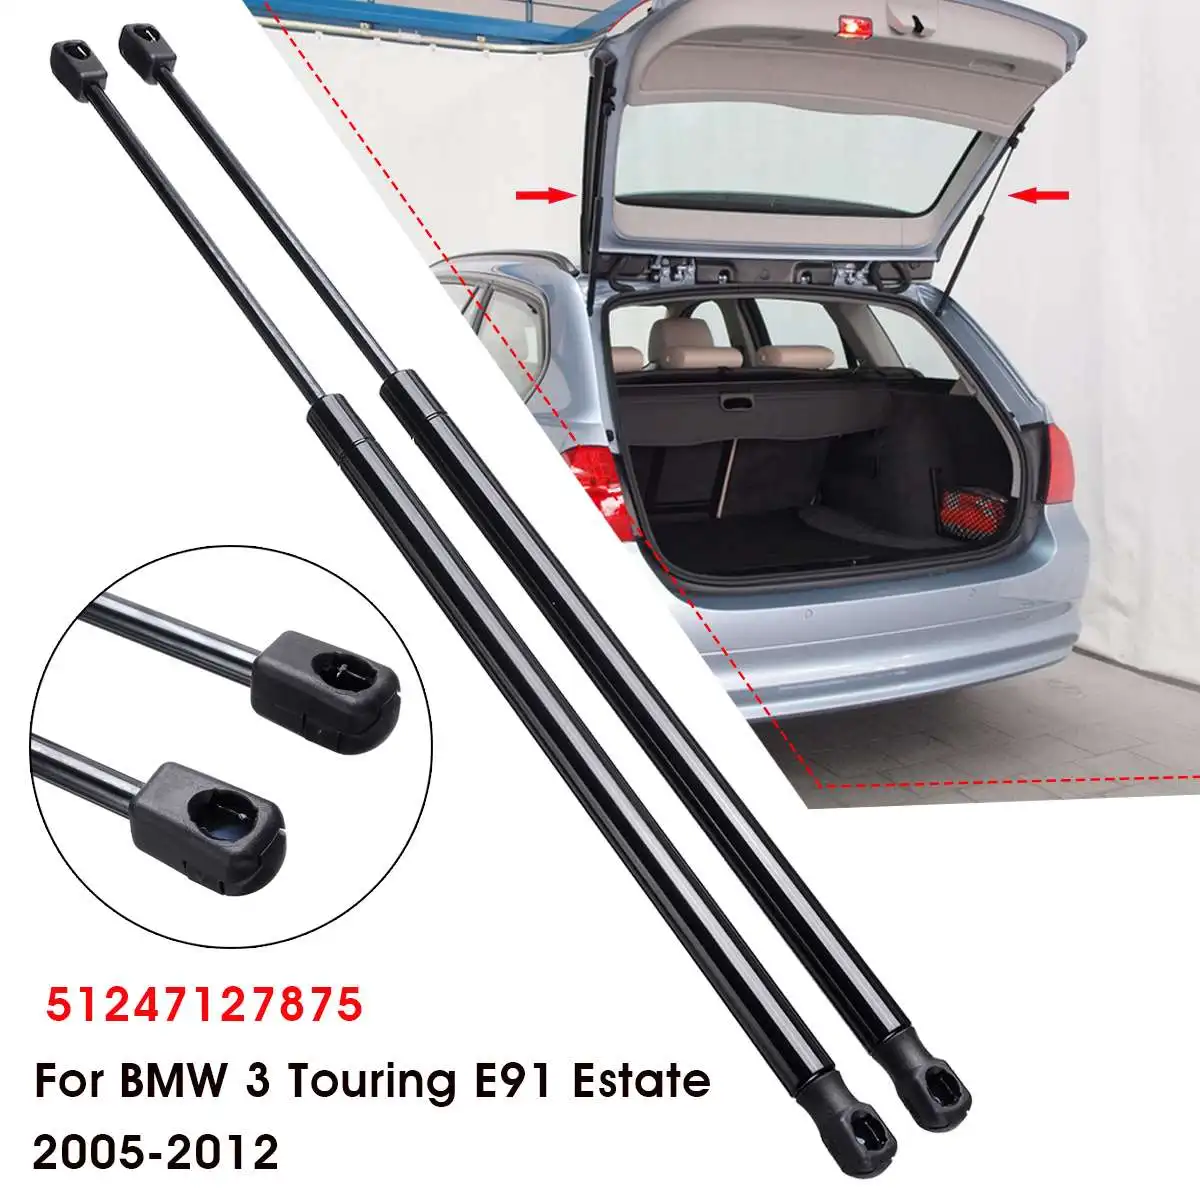 Gas Strut 1 Pair of Rear Tailgate Boot Trunk Gas Struts Support Spring for BMW 3 Touring E91 Estate 2005-2012. 